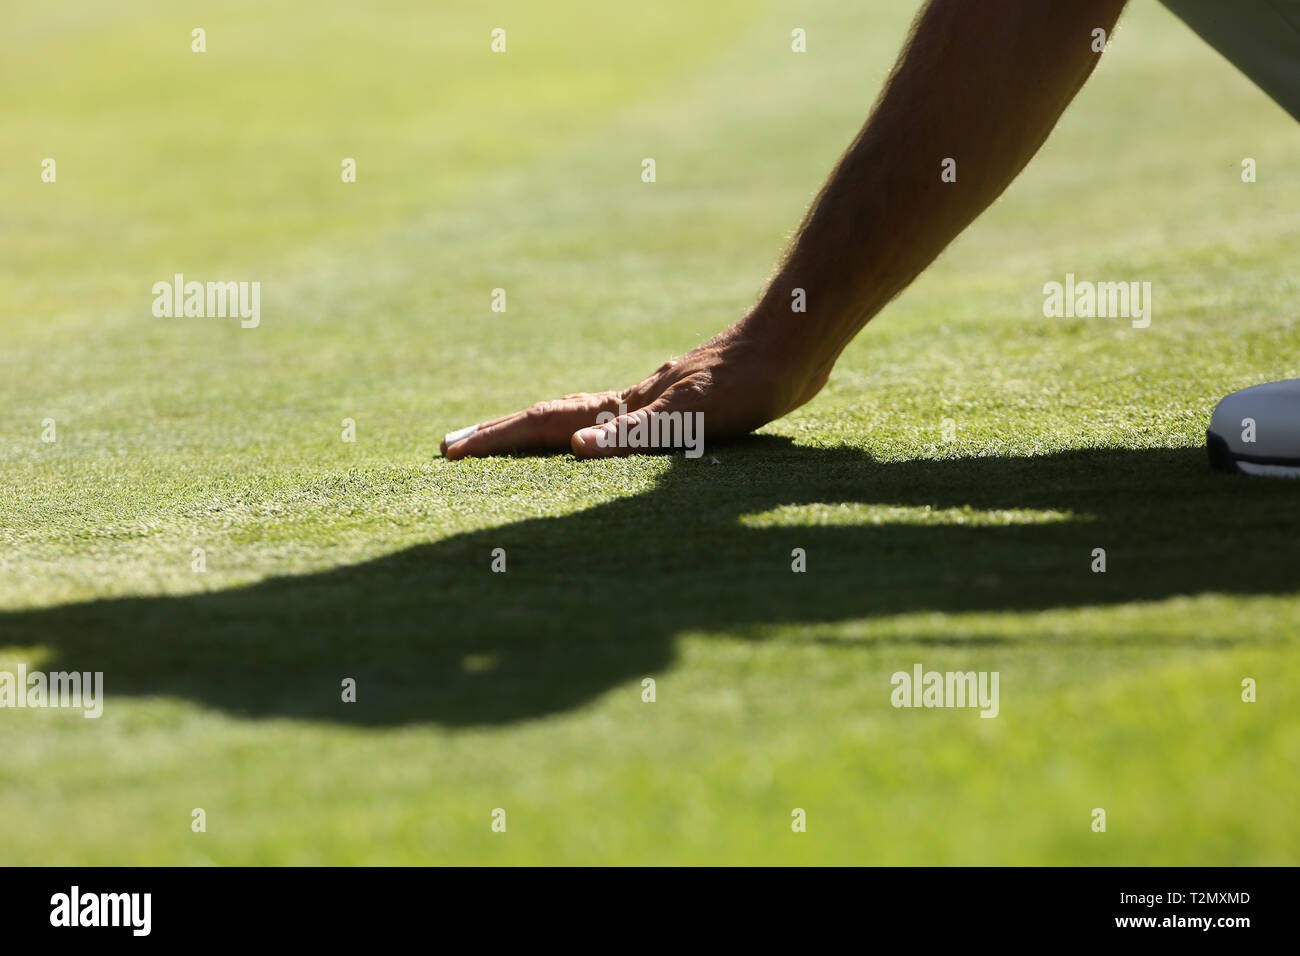 man touching grass on golf course Stock Photo